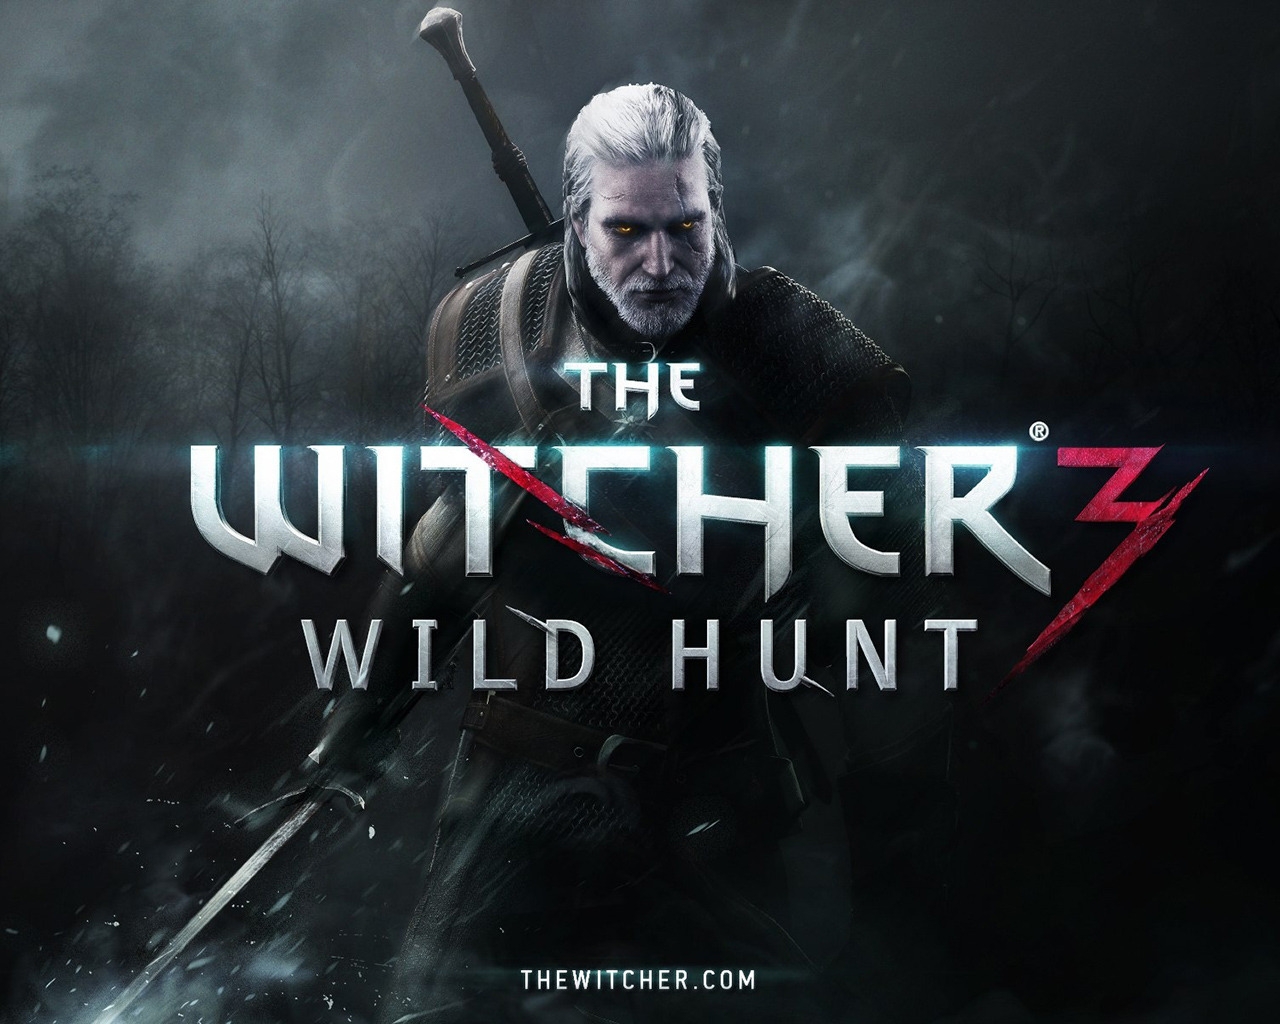 The Witcher 3 for 1280 x 1024 resolution